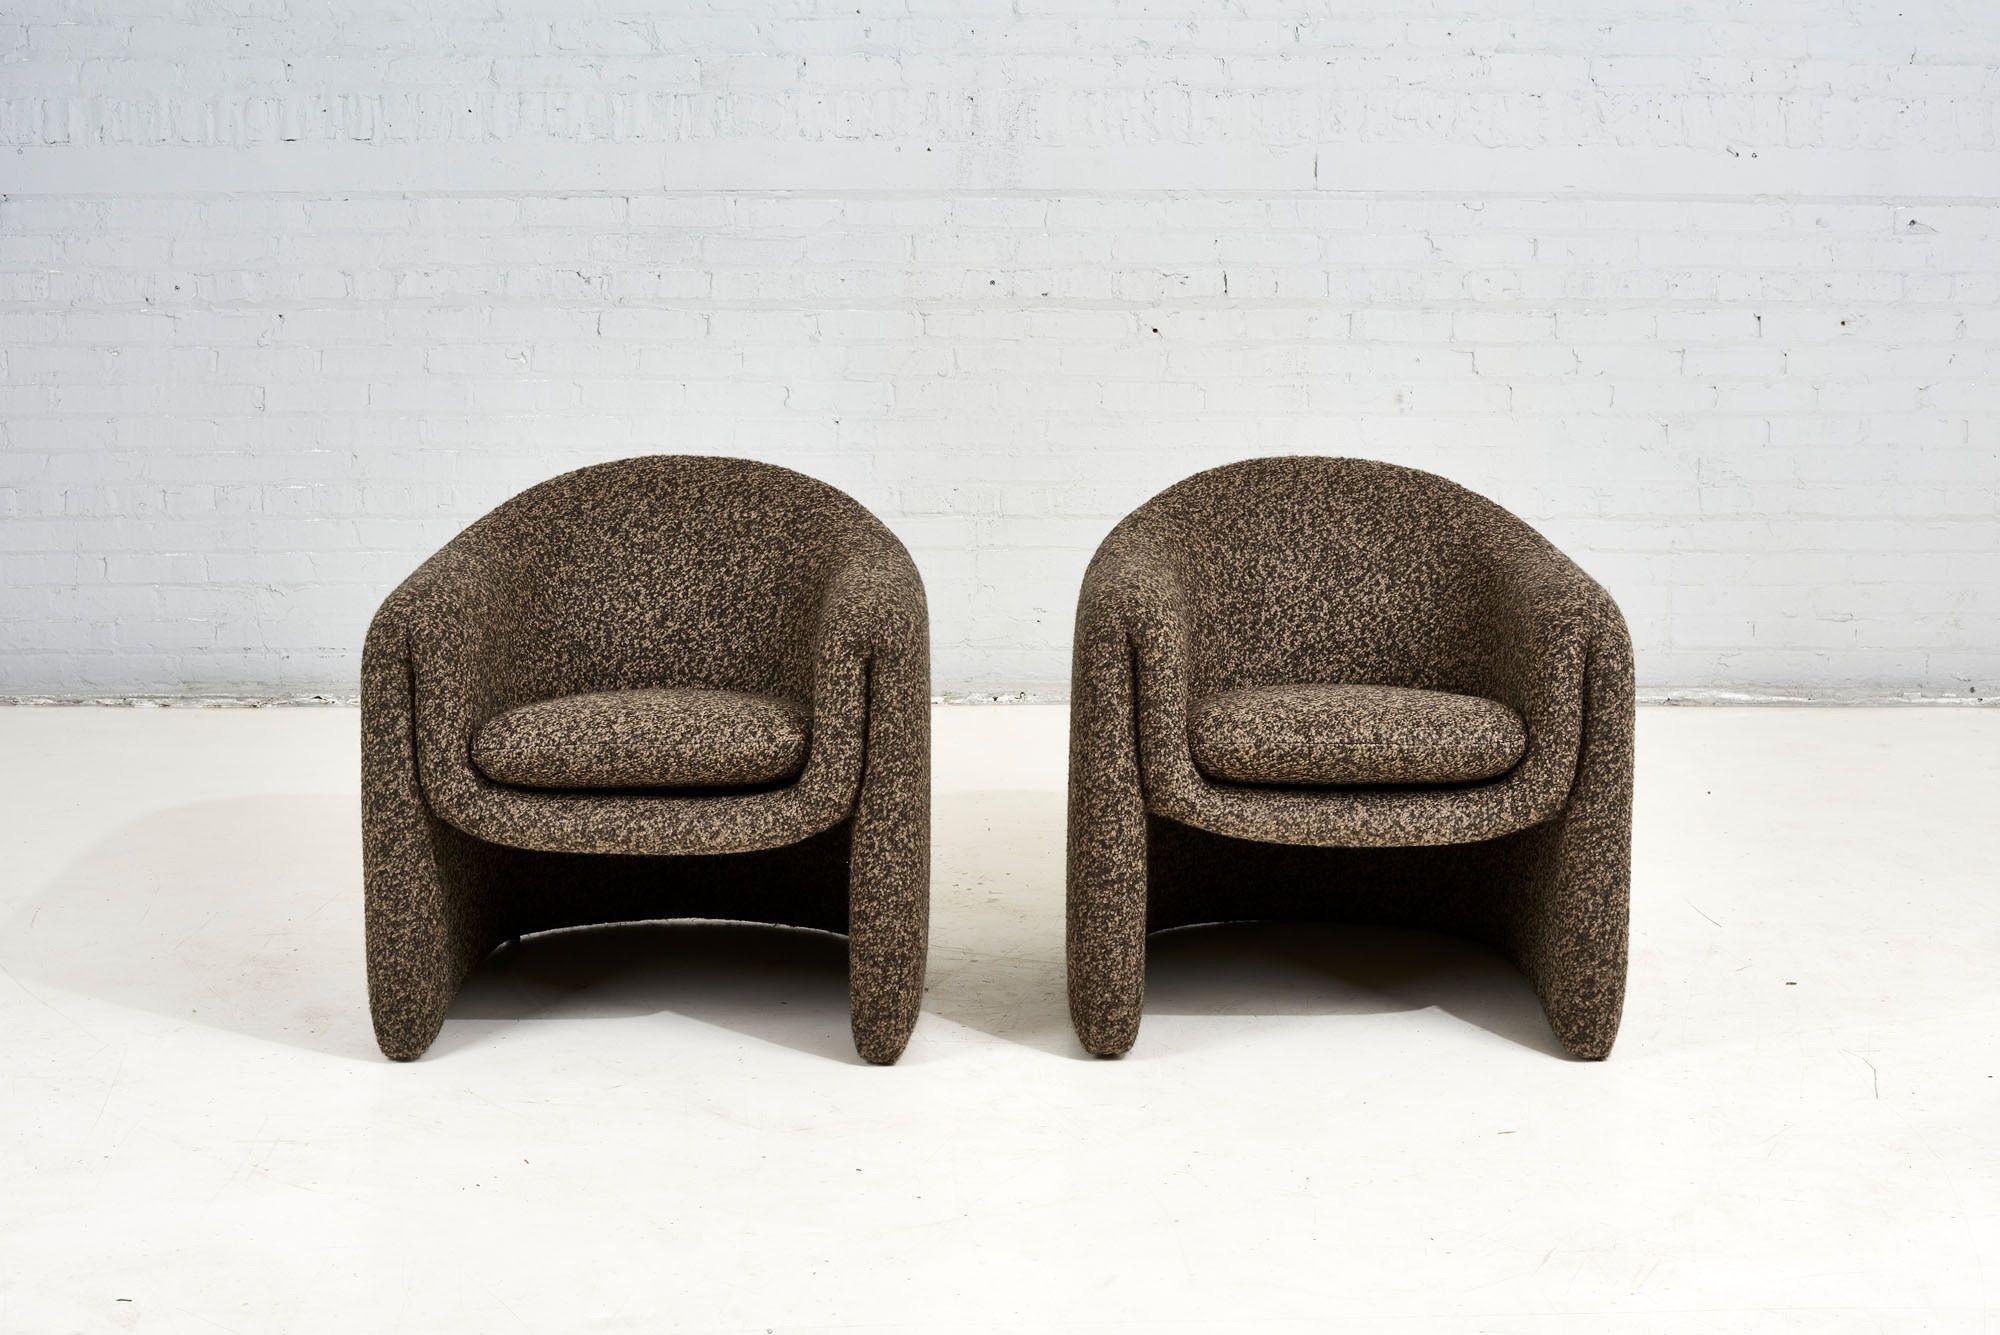 Vladimir Kagan lounge chairs by Preview, 1990. Newly reupholstered in boucle.